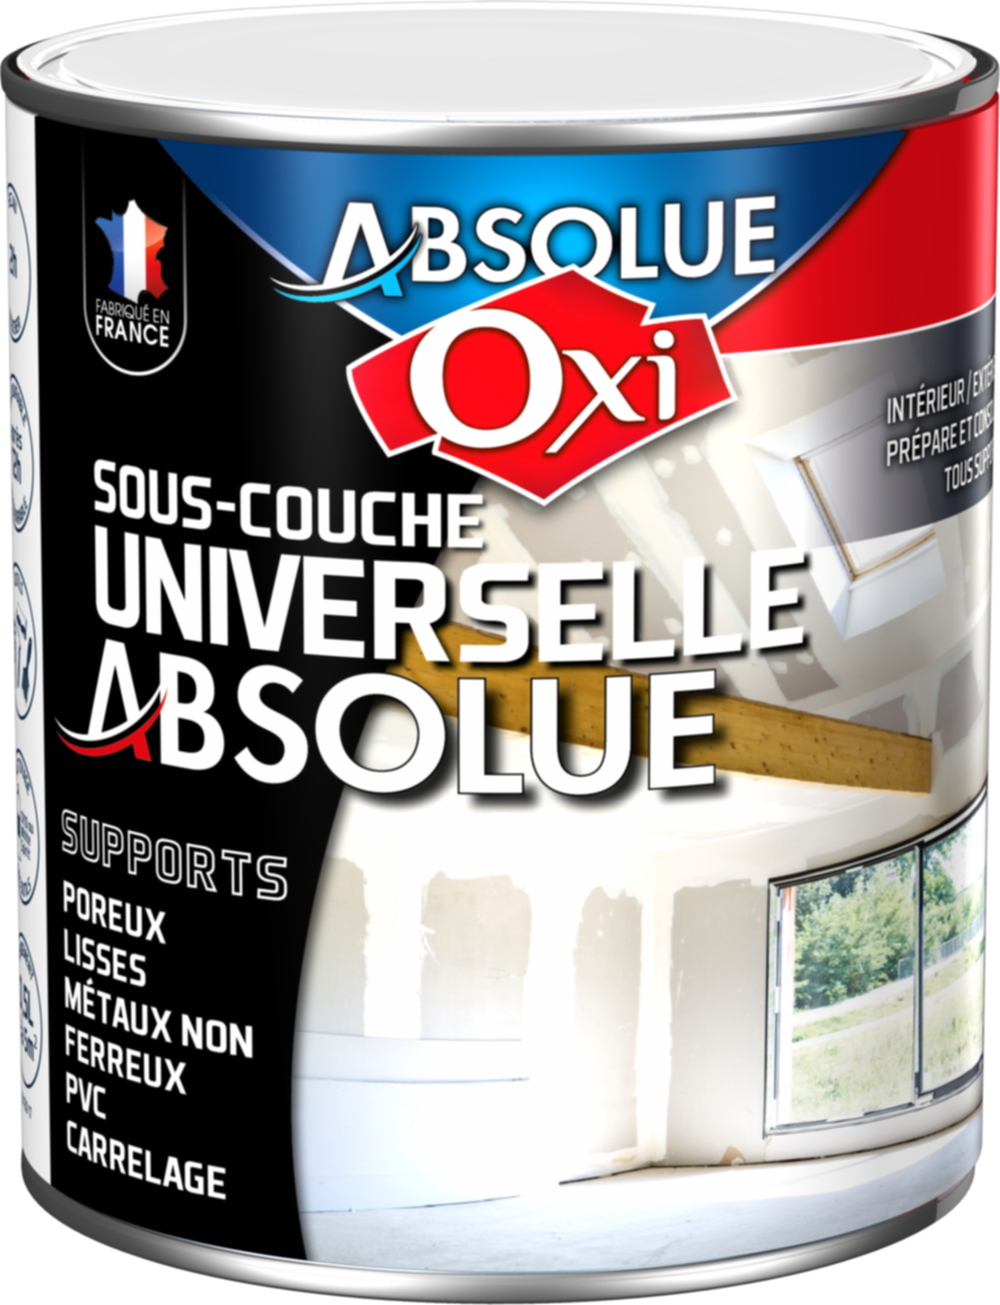 Sous-couche universelle Absolue int/ext 1L - OXI